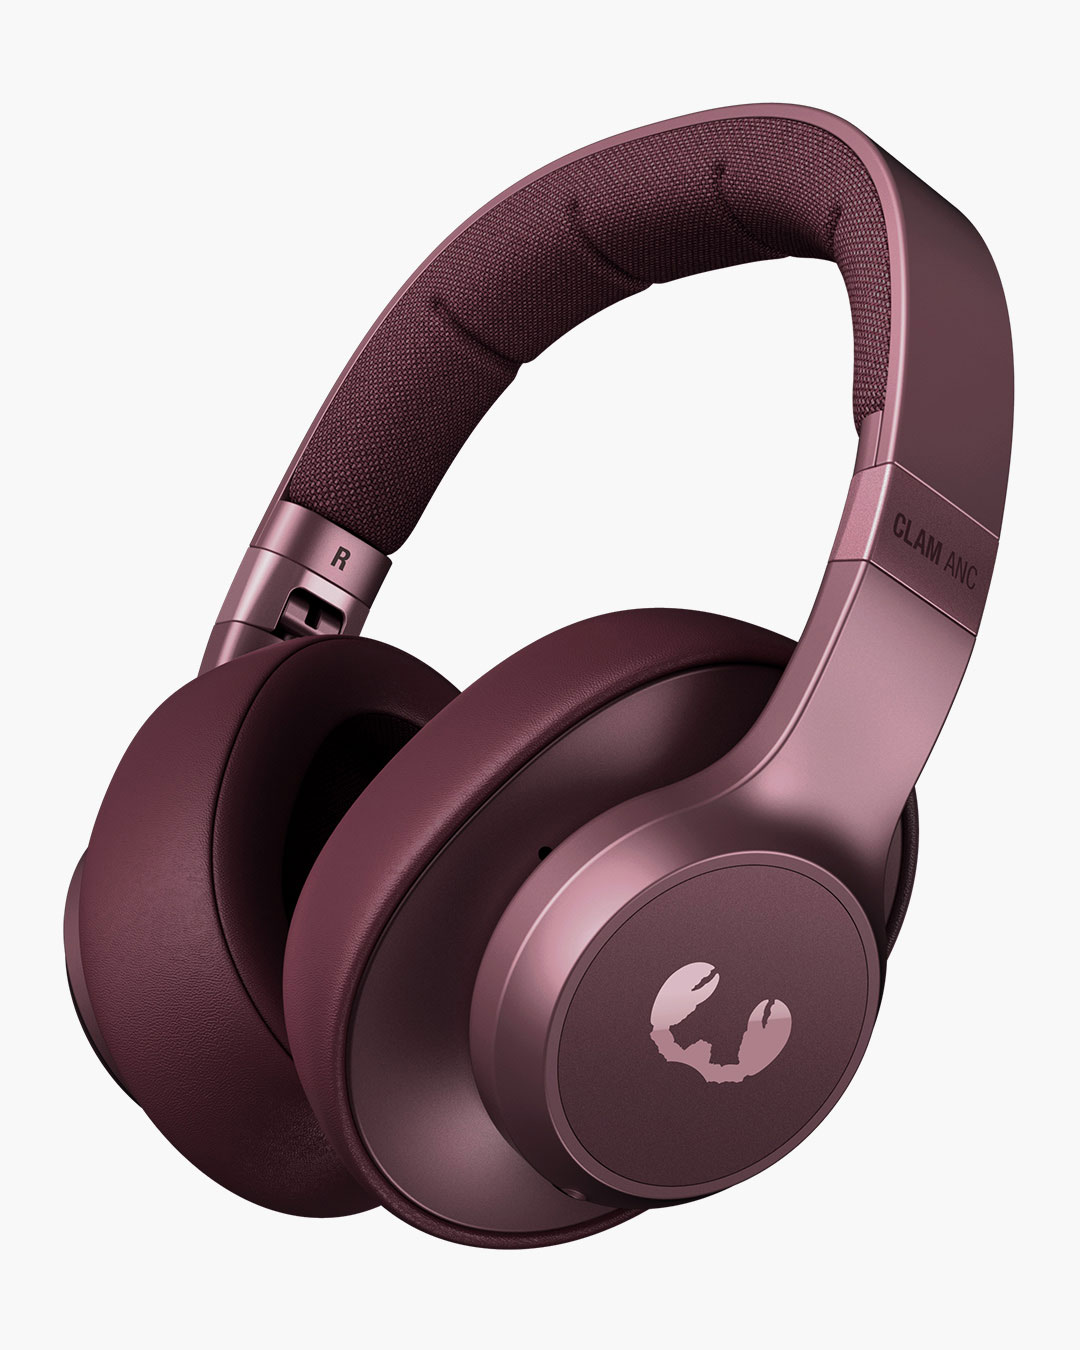 Fresh 'n Rebel - Clam ANC - Wireless over-ear headphones with active noise cancelling - Deep Mauve